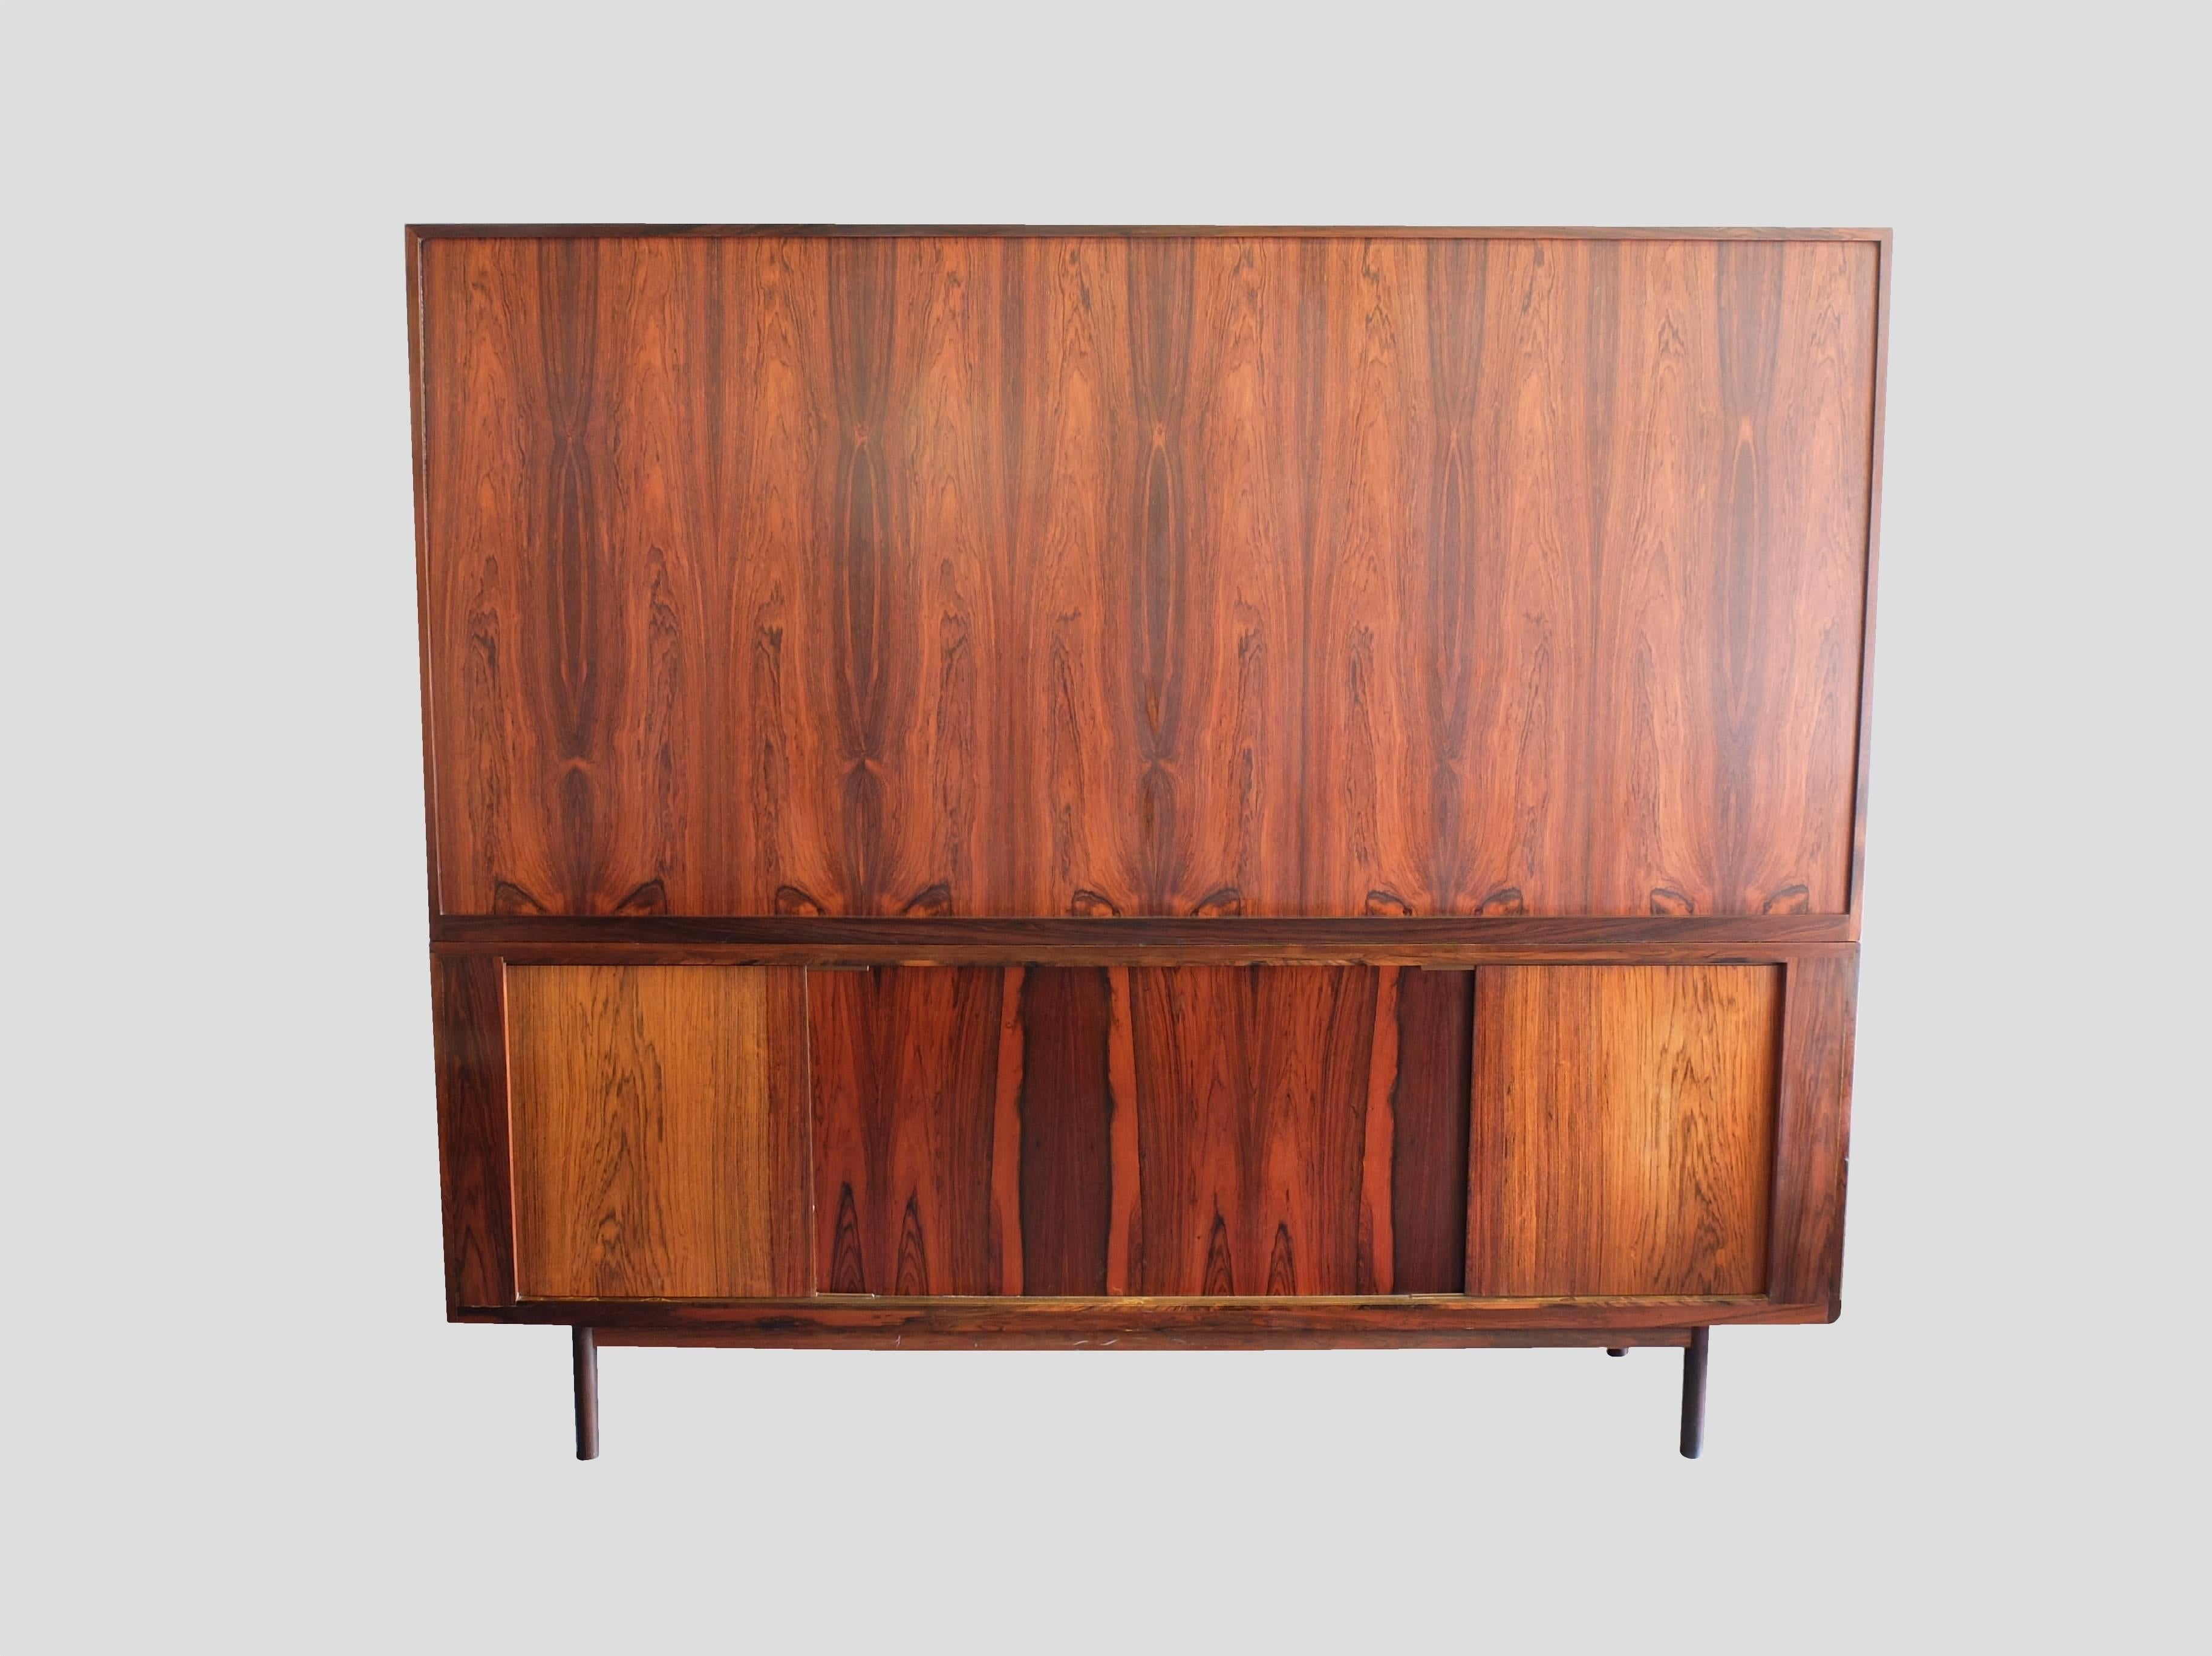 Designed by Ib Kofod Larsen and featuring beautifully grained Brazilian Rosewood throughout. This sideboard has two tambour doors of the highest quality, the individual sections only visible under close inspection. Even the back is finished in the